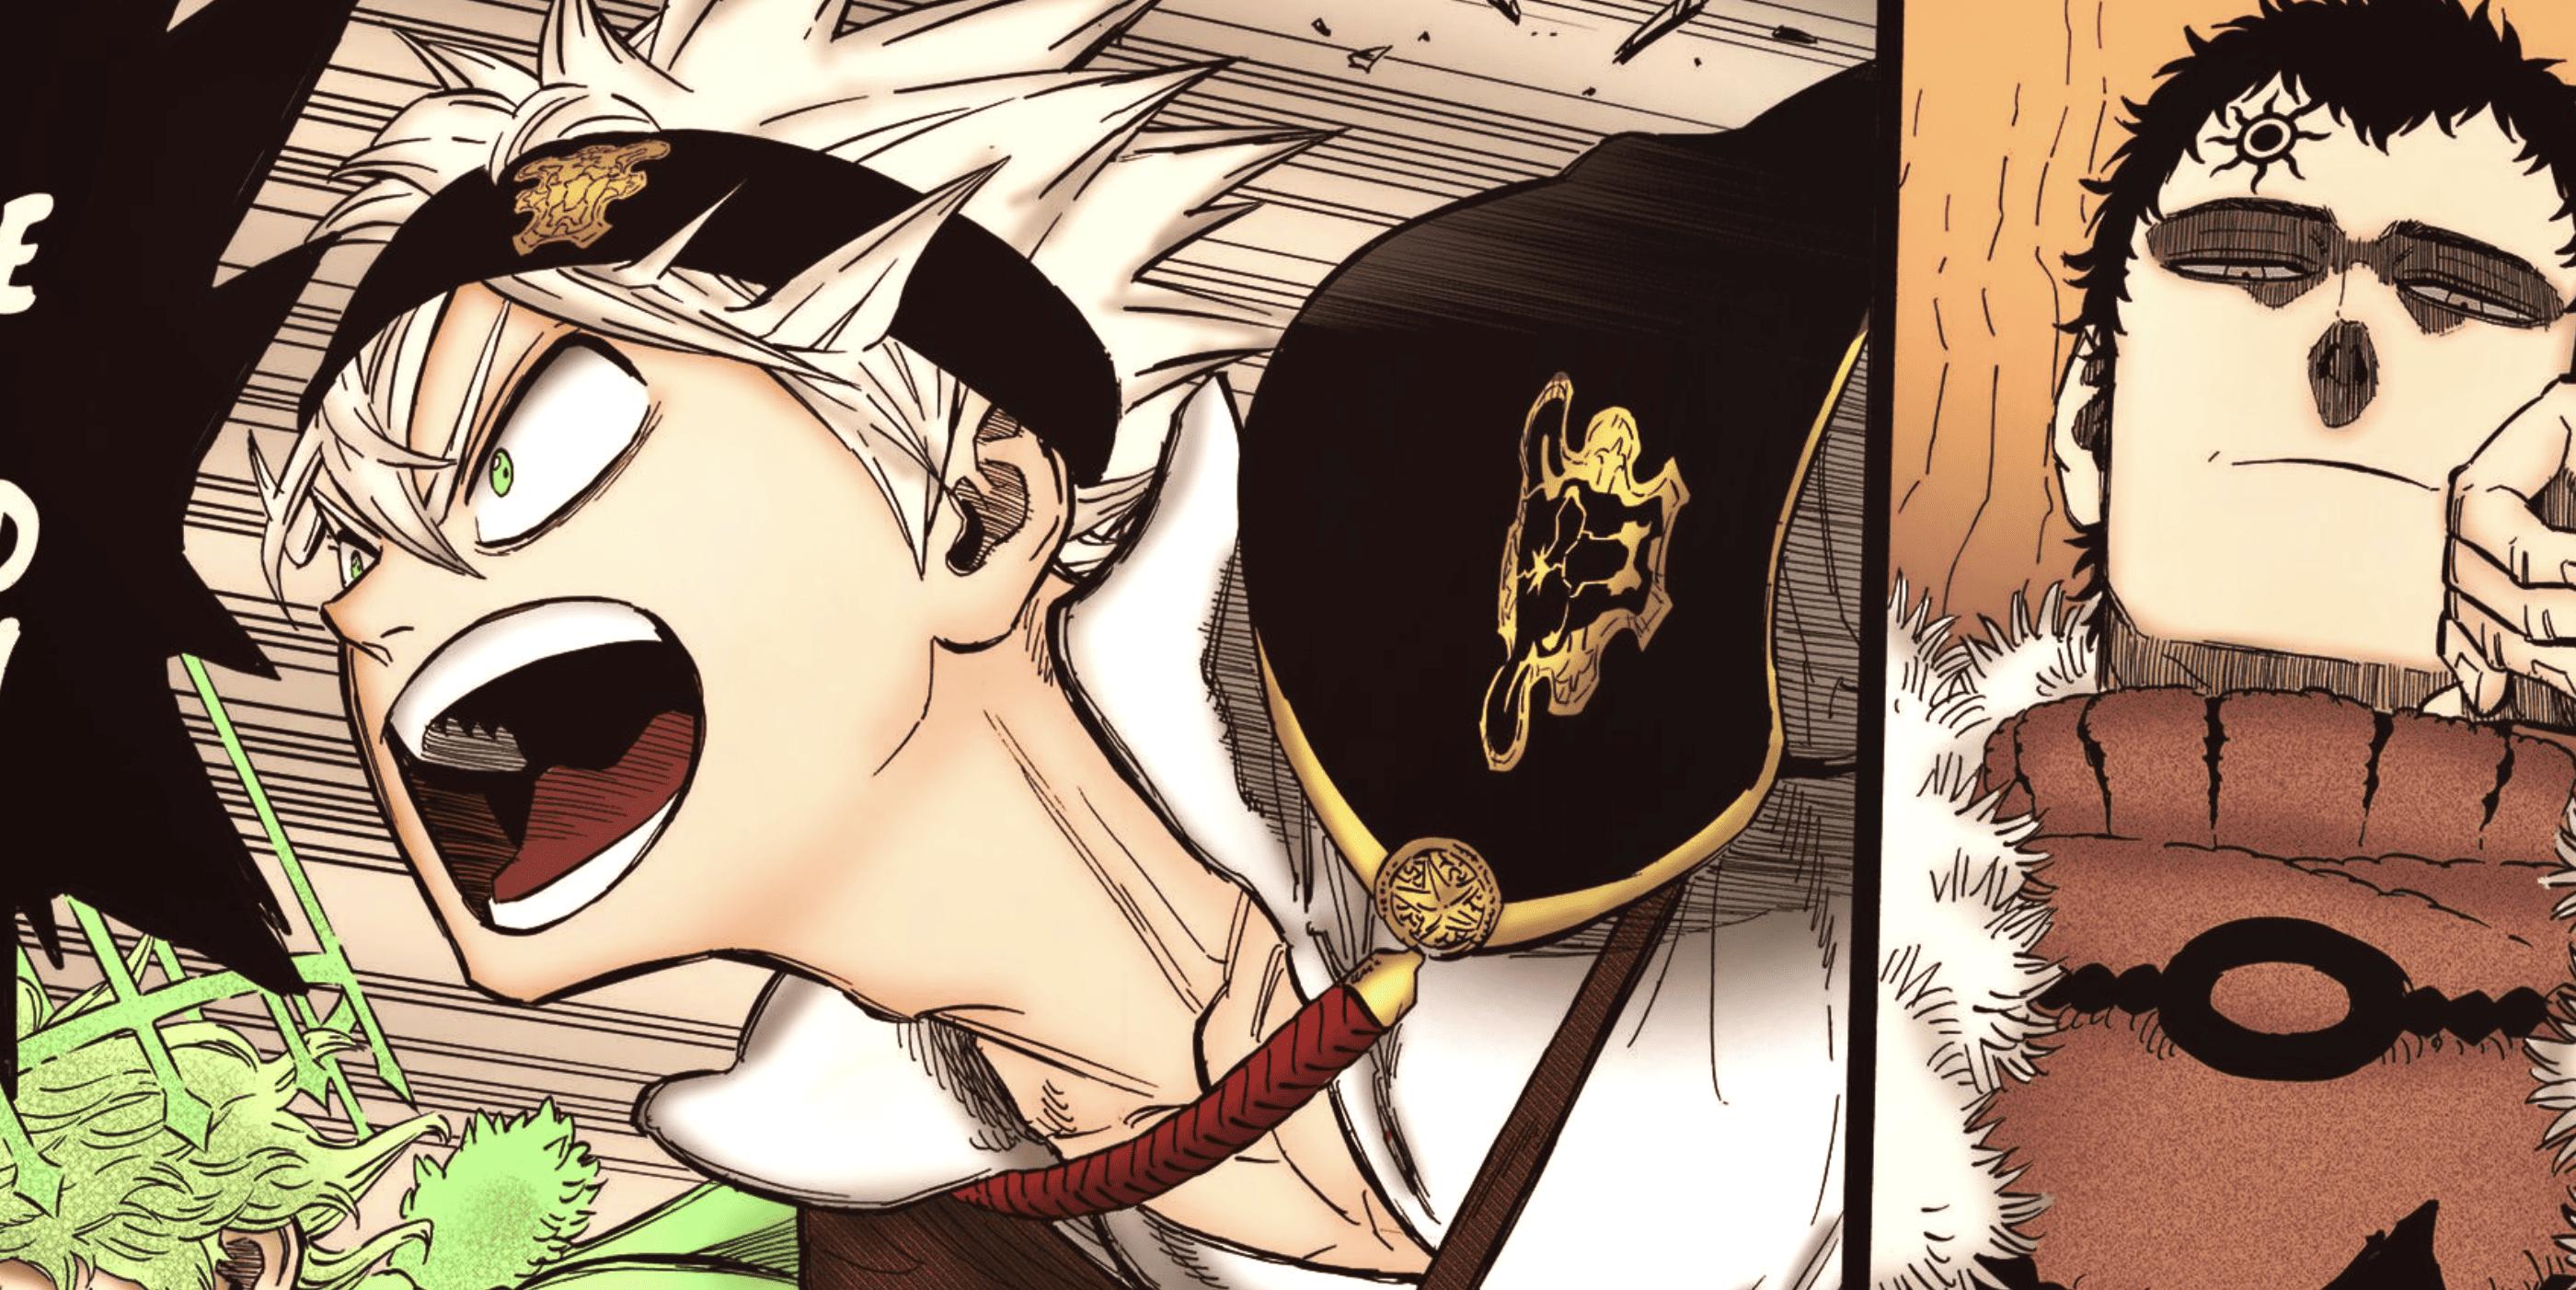 Black Clover Chapter 369 release date